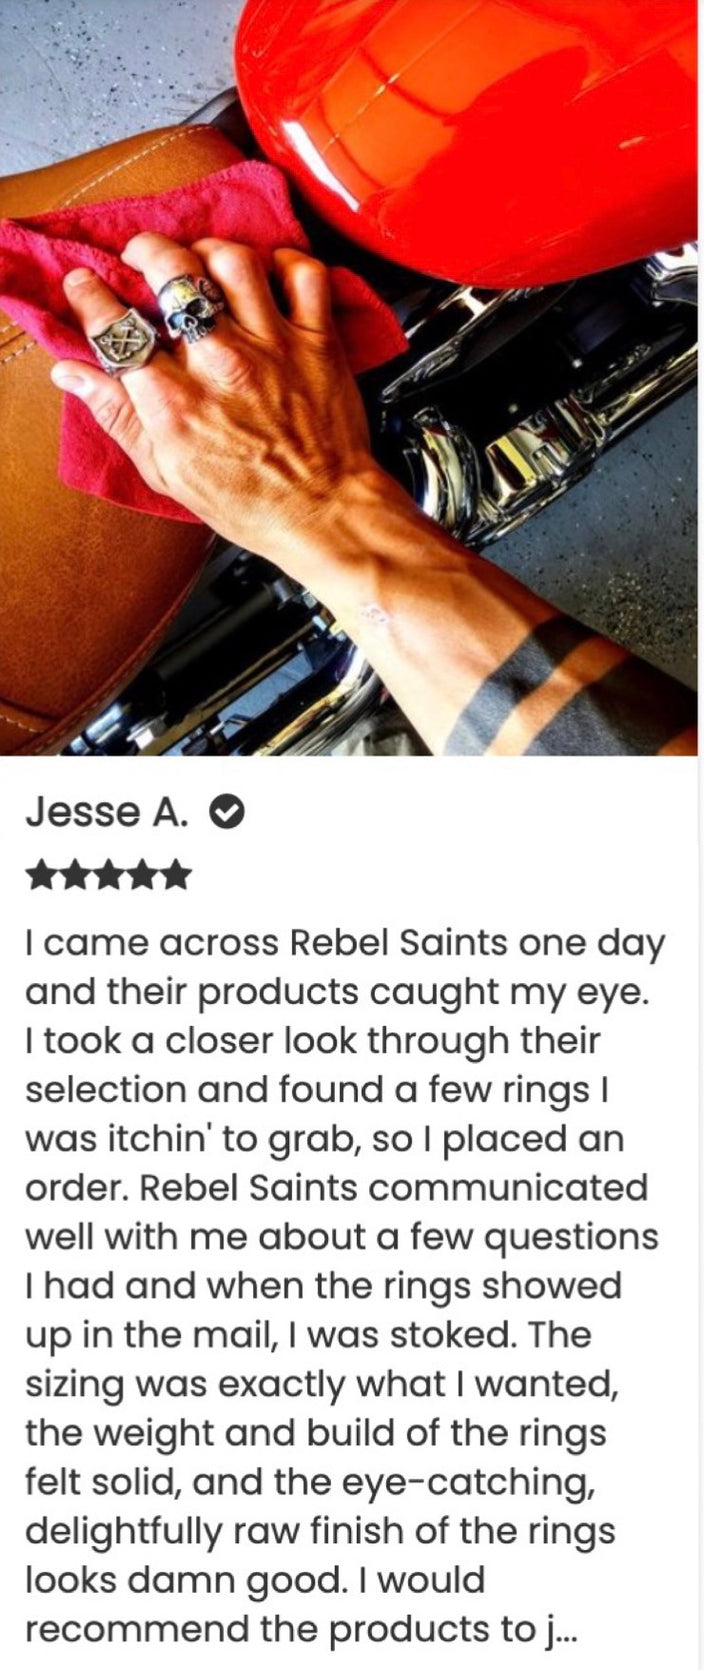 Rebel Saint Co Customer Review: Solid build and weight of rings, eye-catching and delightfully raw finish, highly recommended